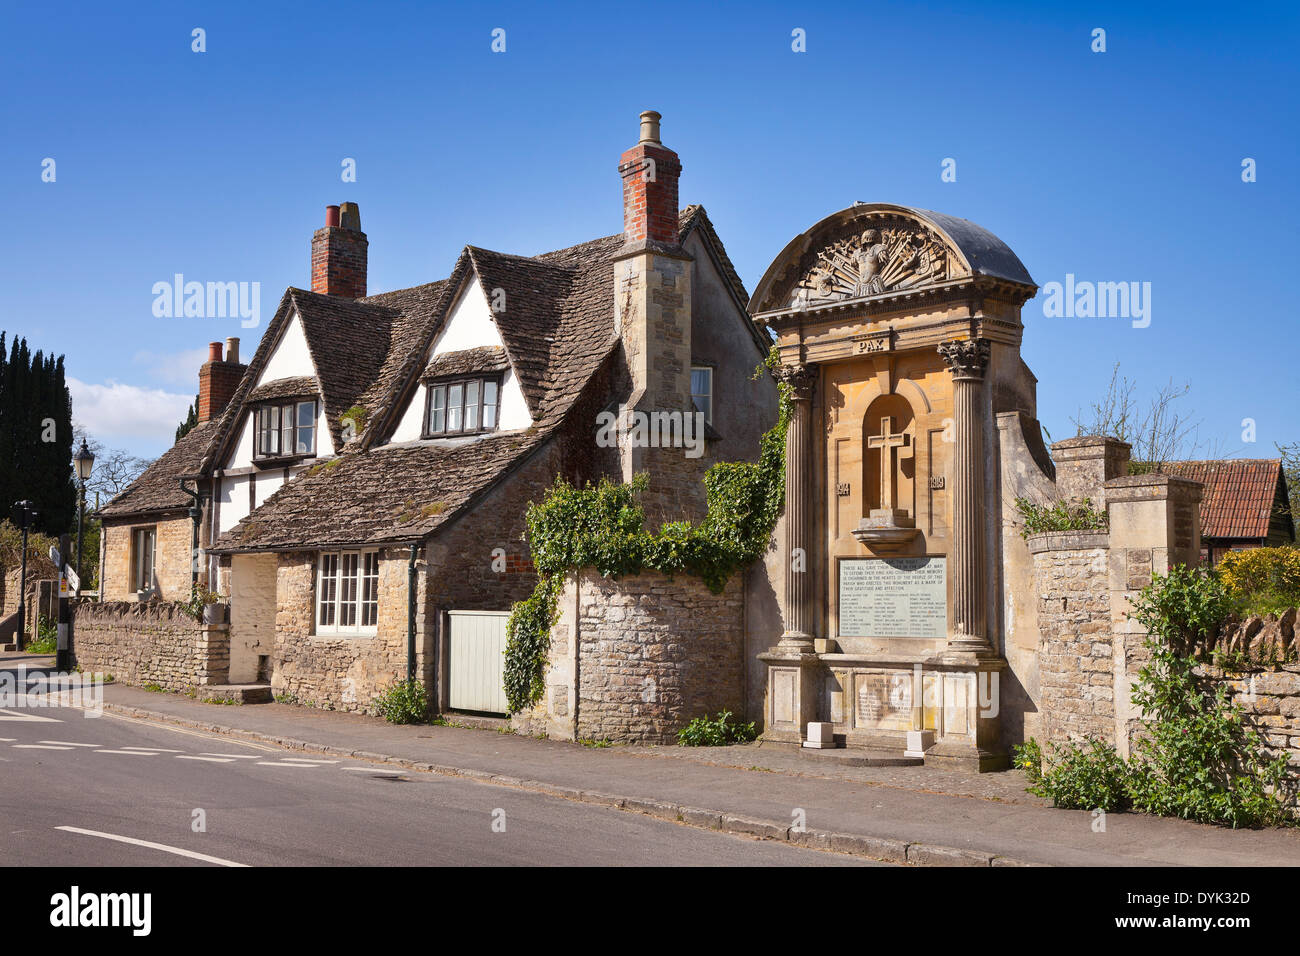 Lacock village, Wiltshire, UK. Traditional cottages. sunny day, blue sky Stock Photo